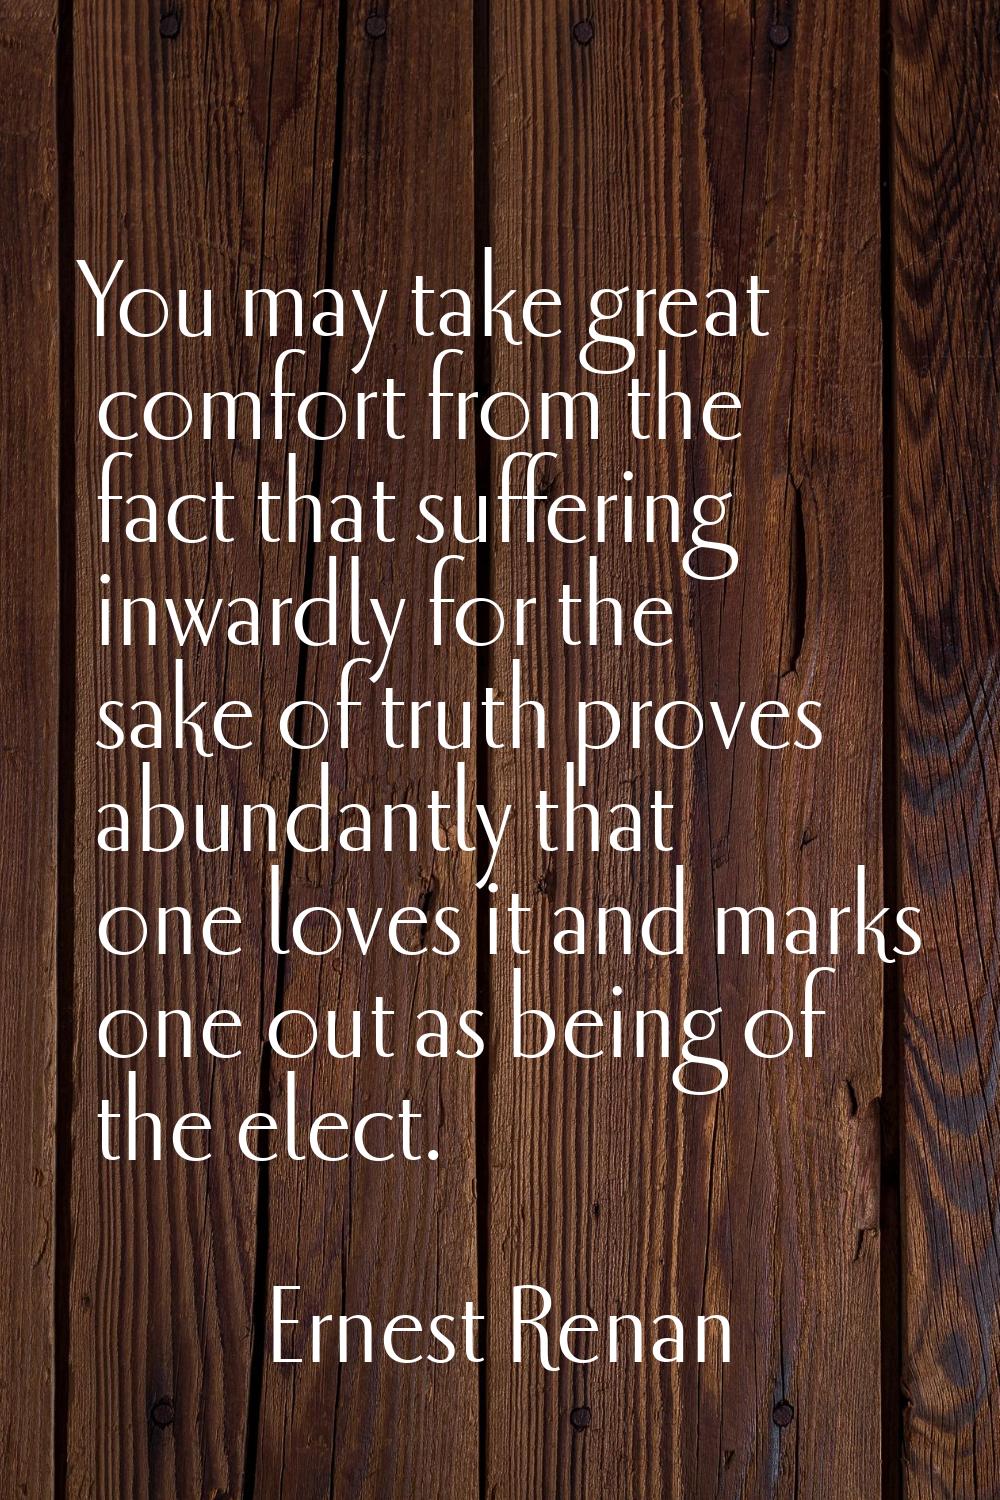 You may take great comfort from the fact that suffering inwardly for the sake of truth proves abund